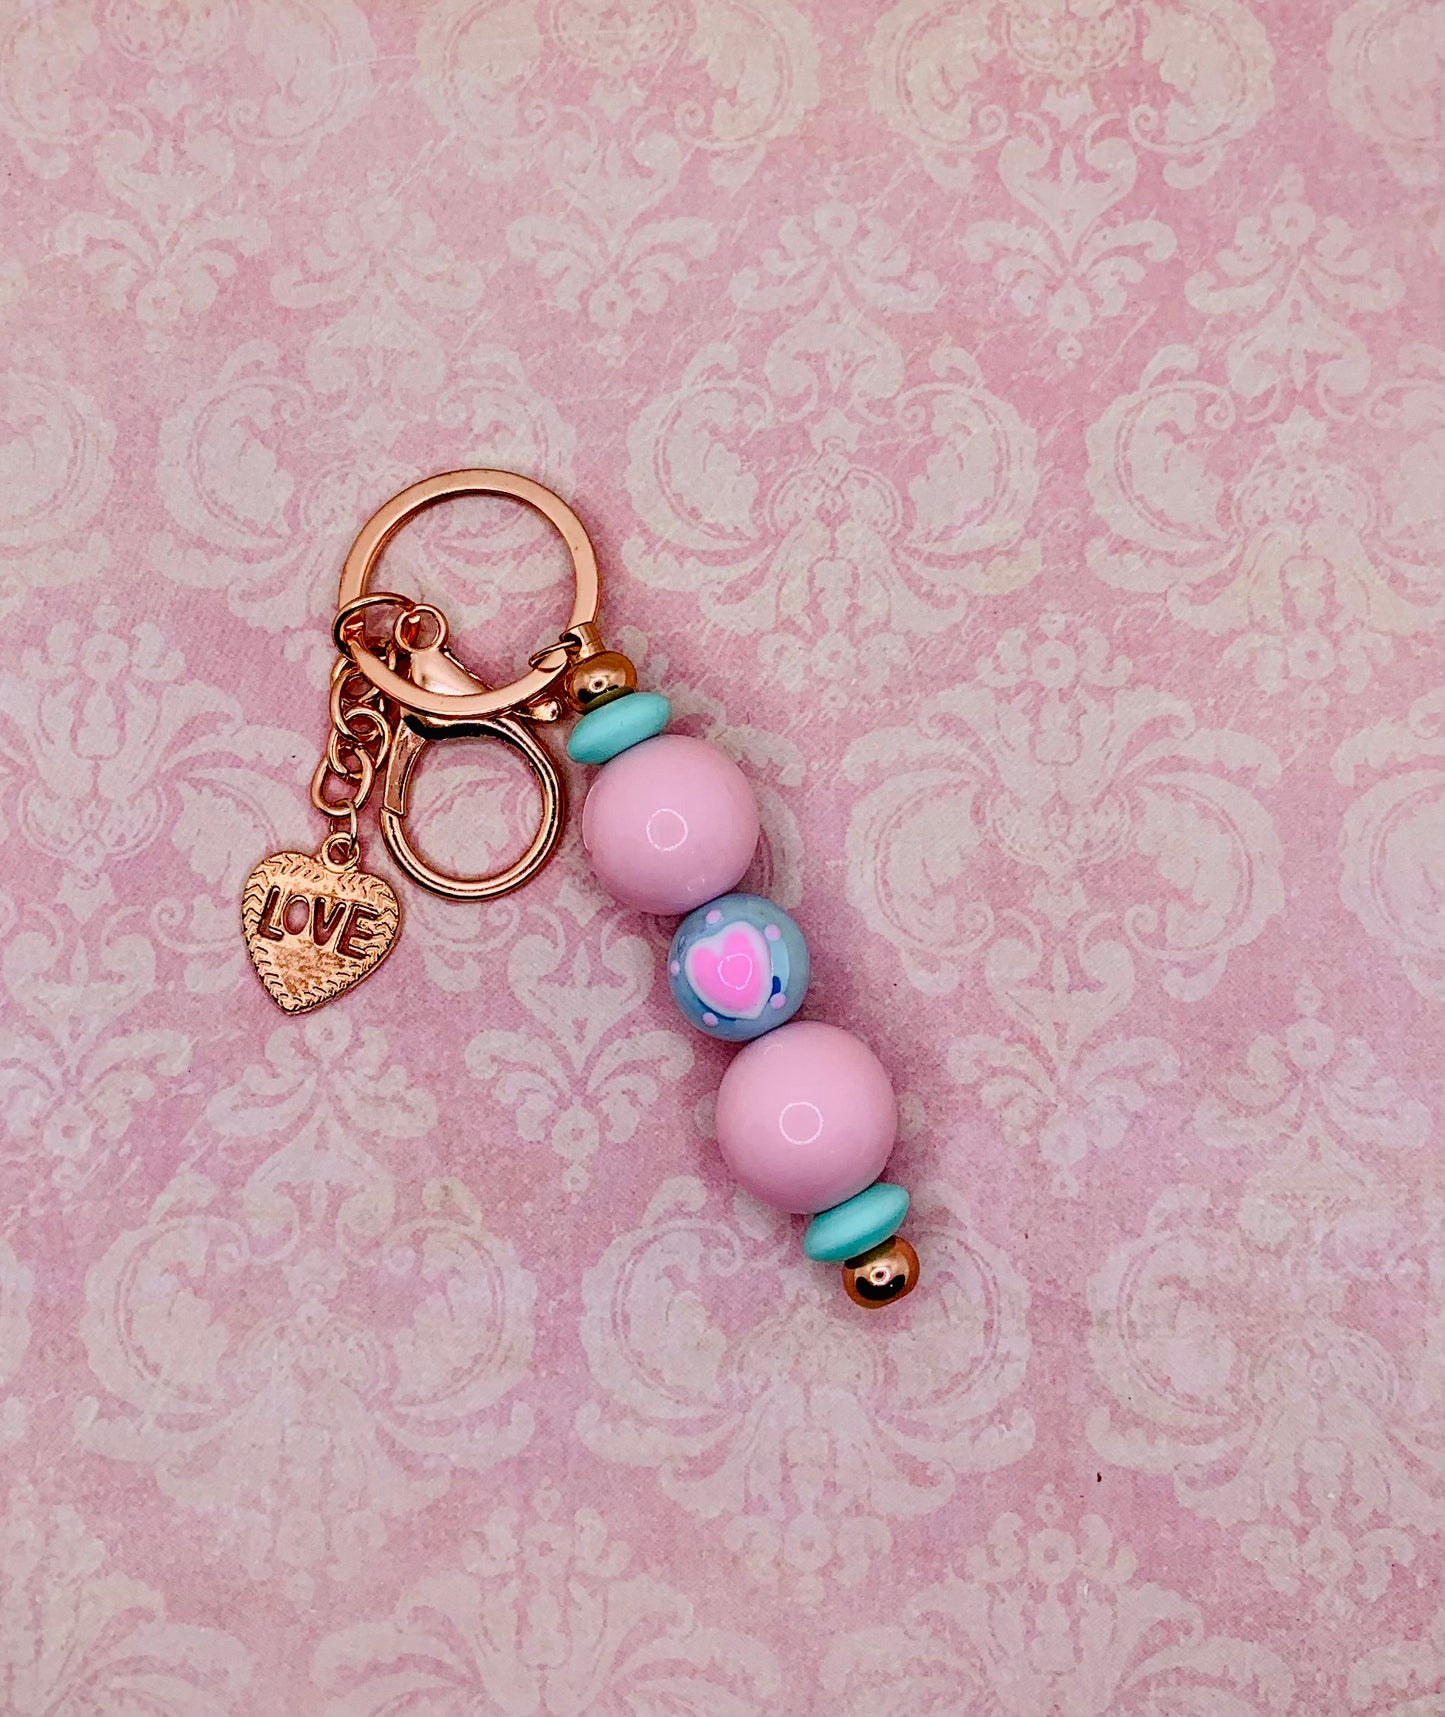 Rose Gold Tone Metal Keychain with Hearts